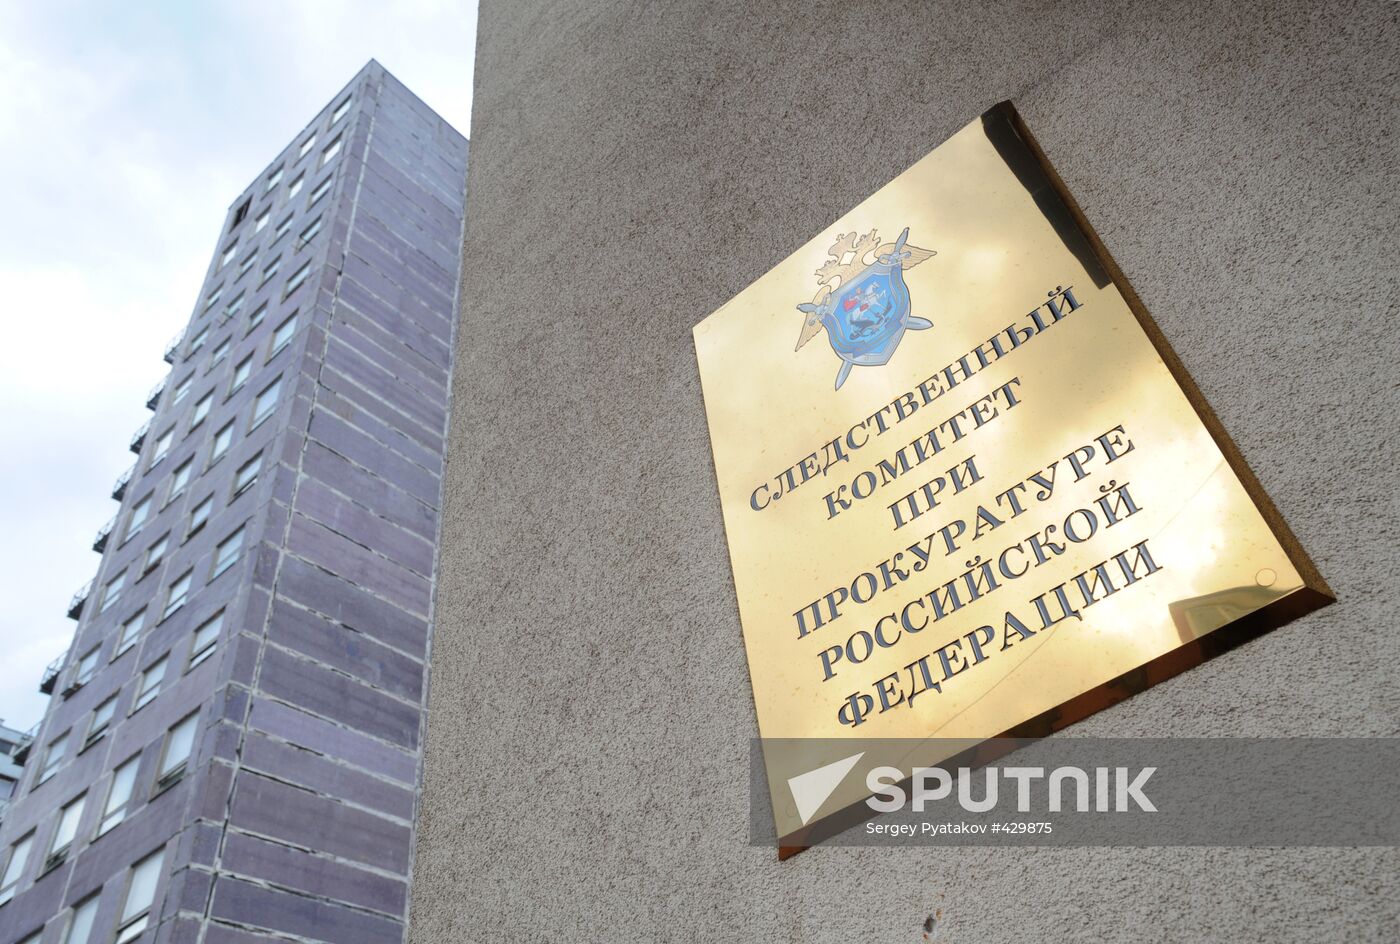 Investigative Committee of General Prosecutor's Office